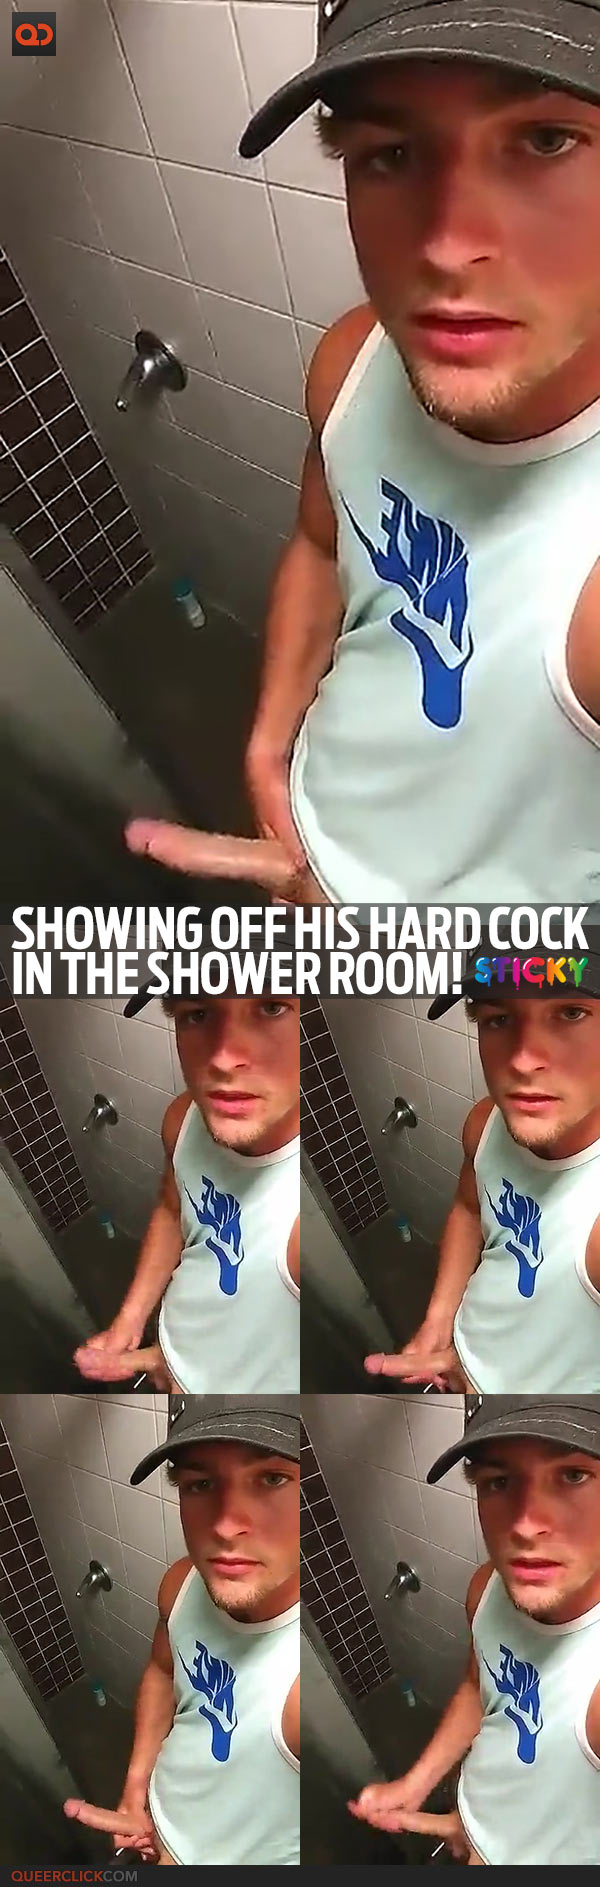 Showing Off His Hard Cock In The Shower Room!